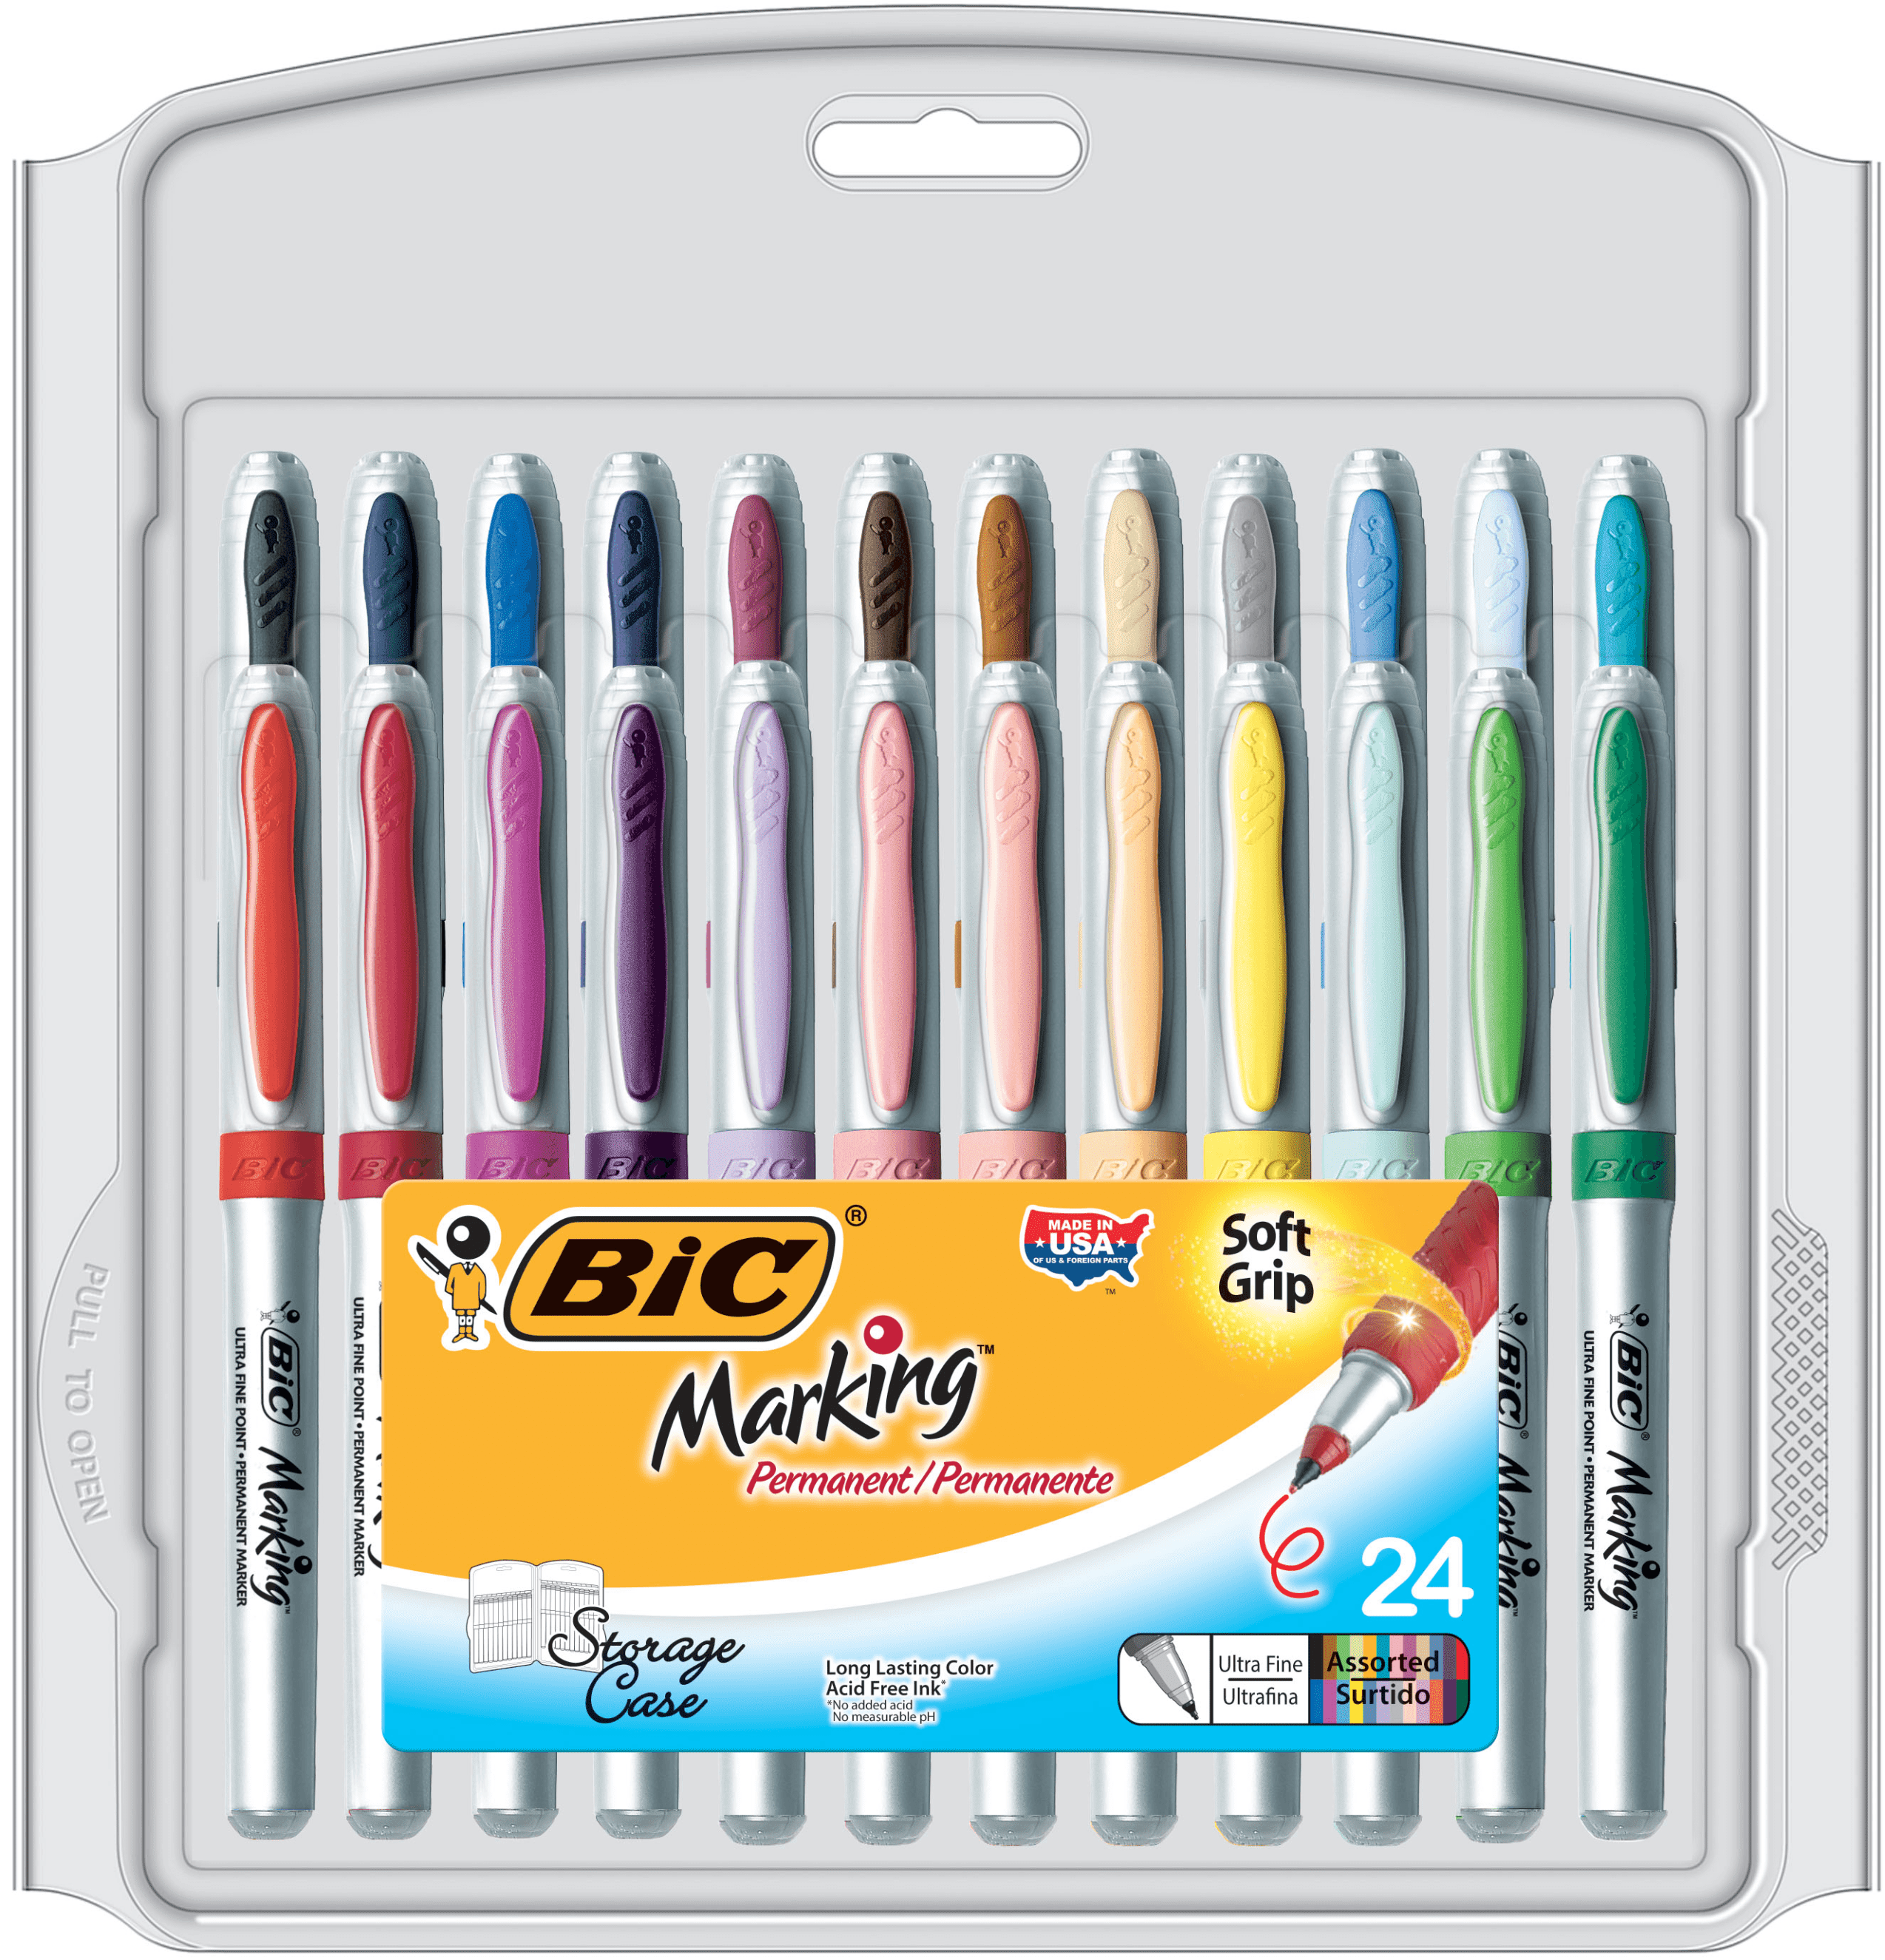 BIC® Intensity™ Fine-Point Permanent Markers, 8 pk - Fry's Food Stores